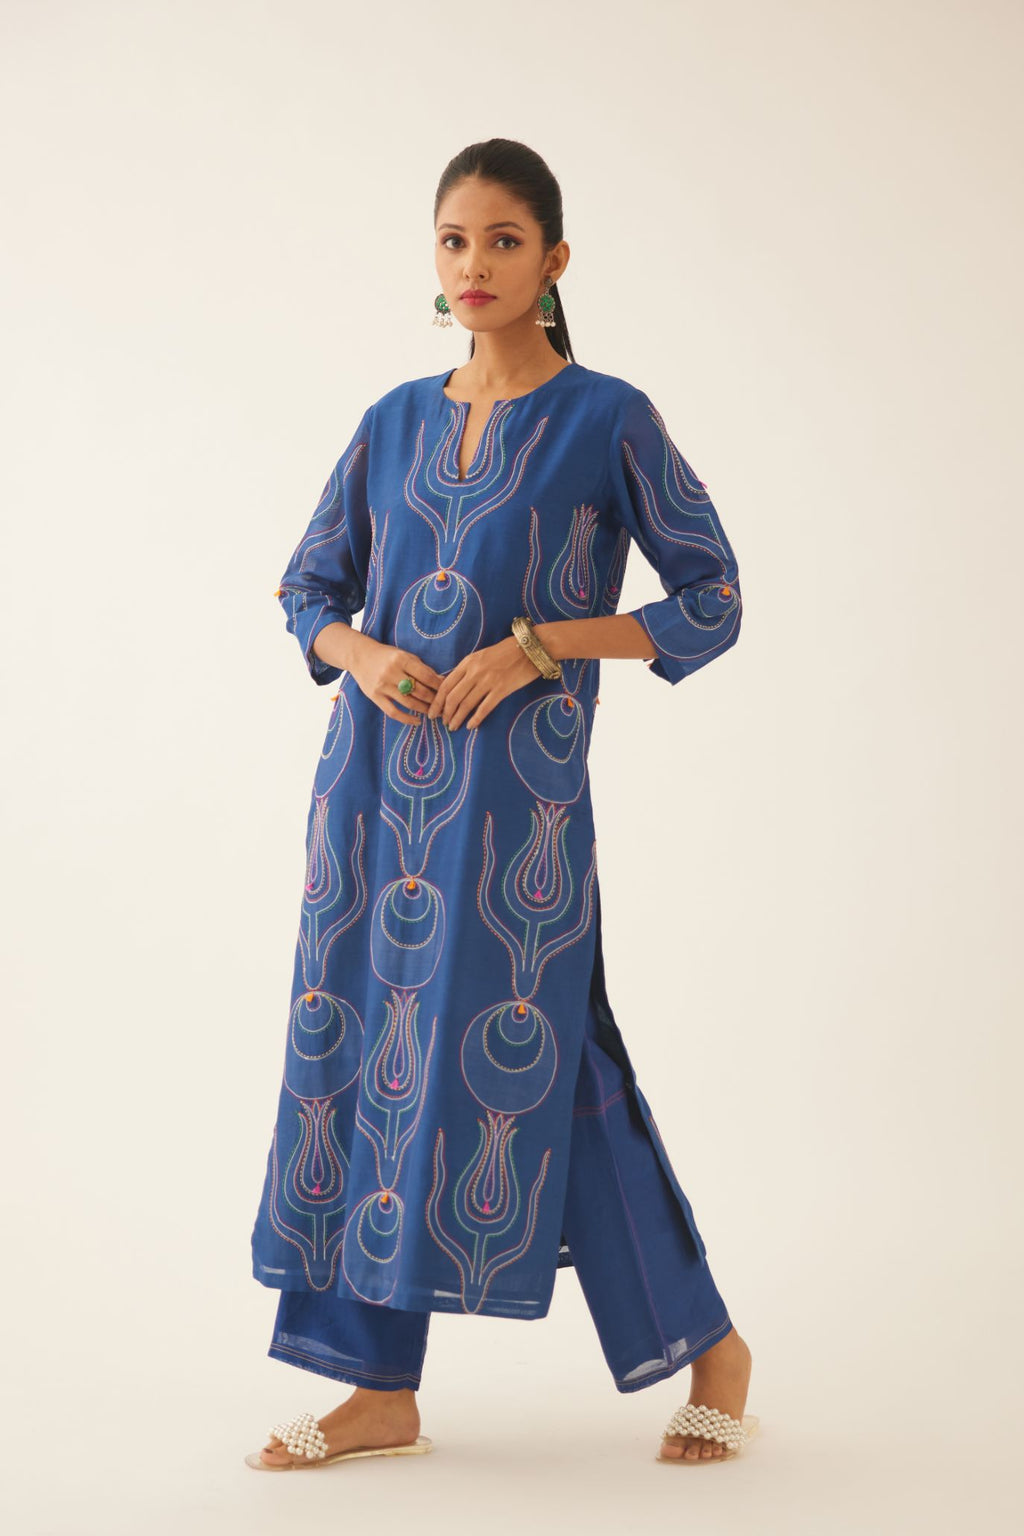 Blue silk chanderi straight kurta set with all-over cotton appliqué work at reverse side, highlighted with kantha work in front side with multi colored thread.